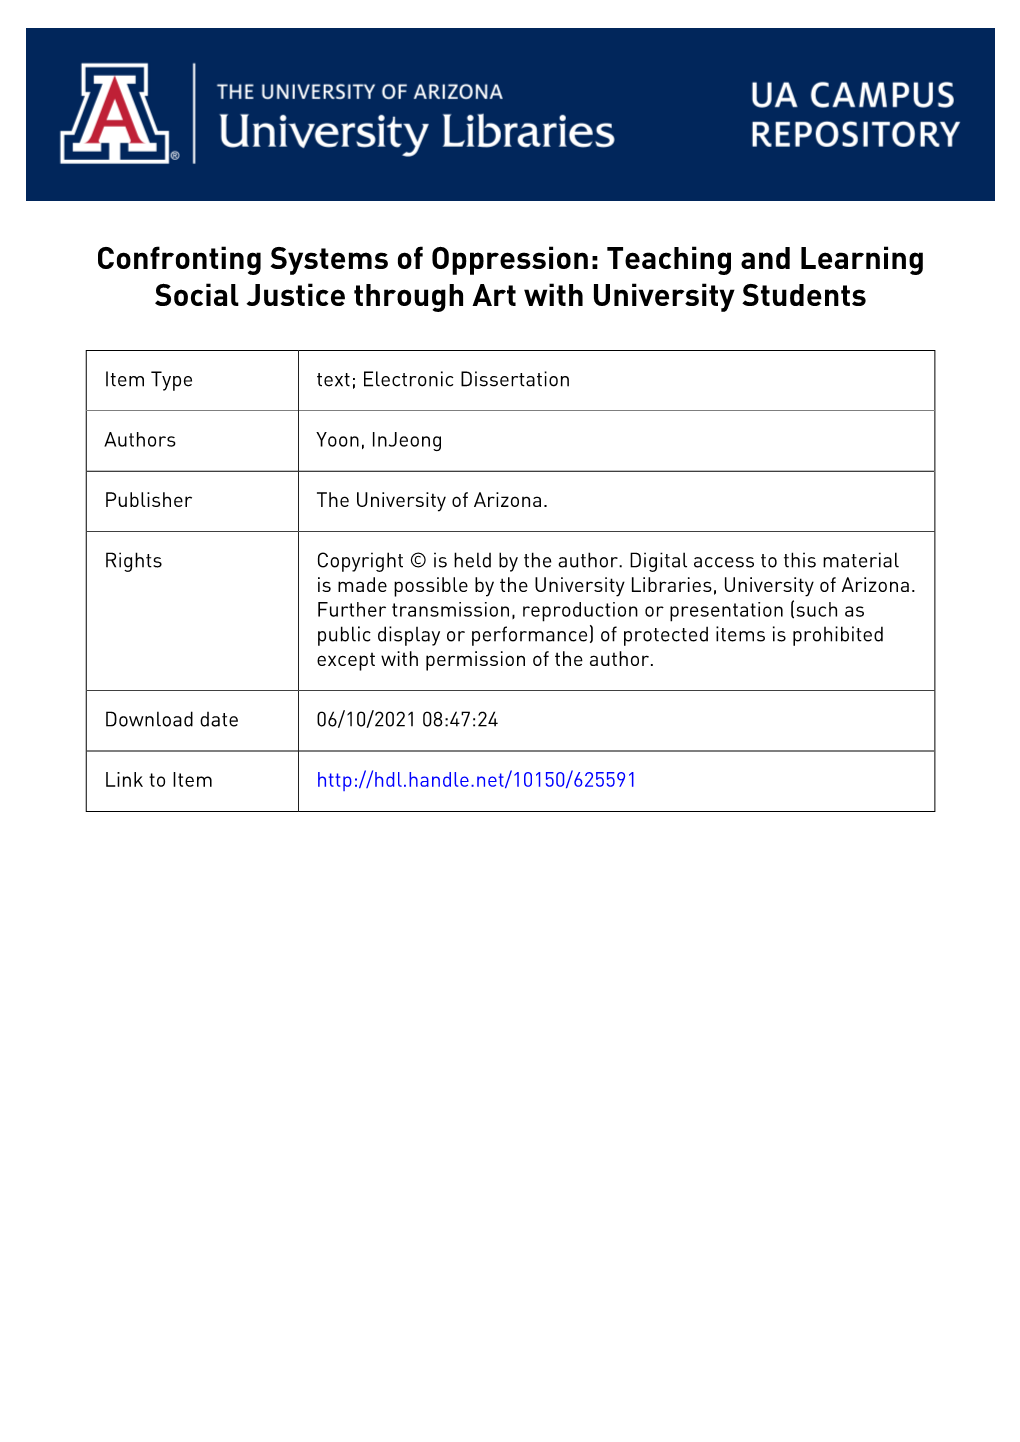 CONFRONTING SYSTEMS of OPPRESSION: TEACHING and LEARNING SOCIAL JUSTICE THROUGH ART with UNIVERSITY STUDENTS by Injeong Yoon